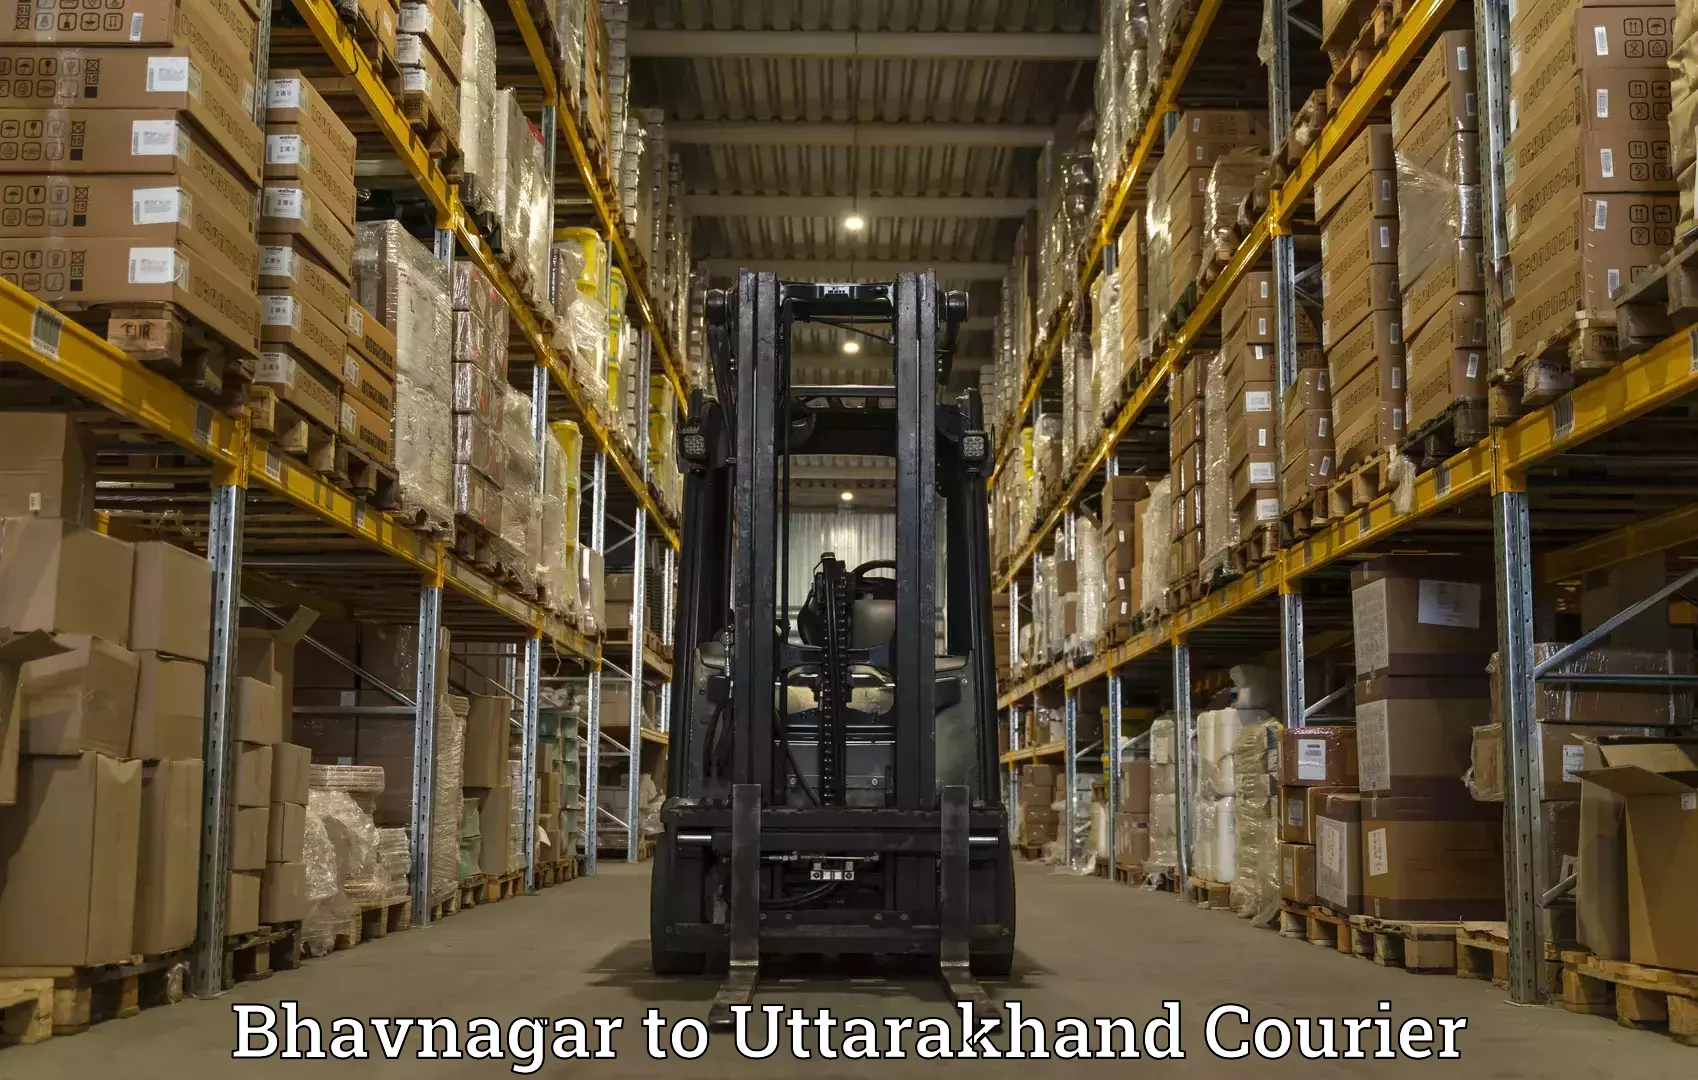 Automated parcel services Bhavnagar to Rishikesh